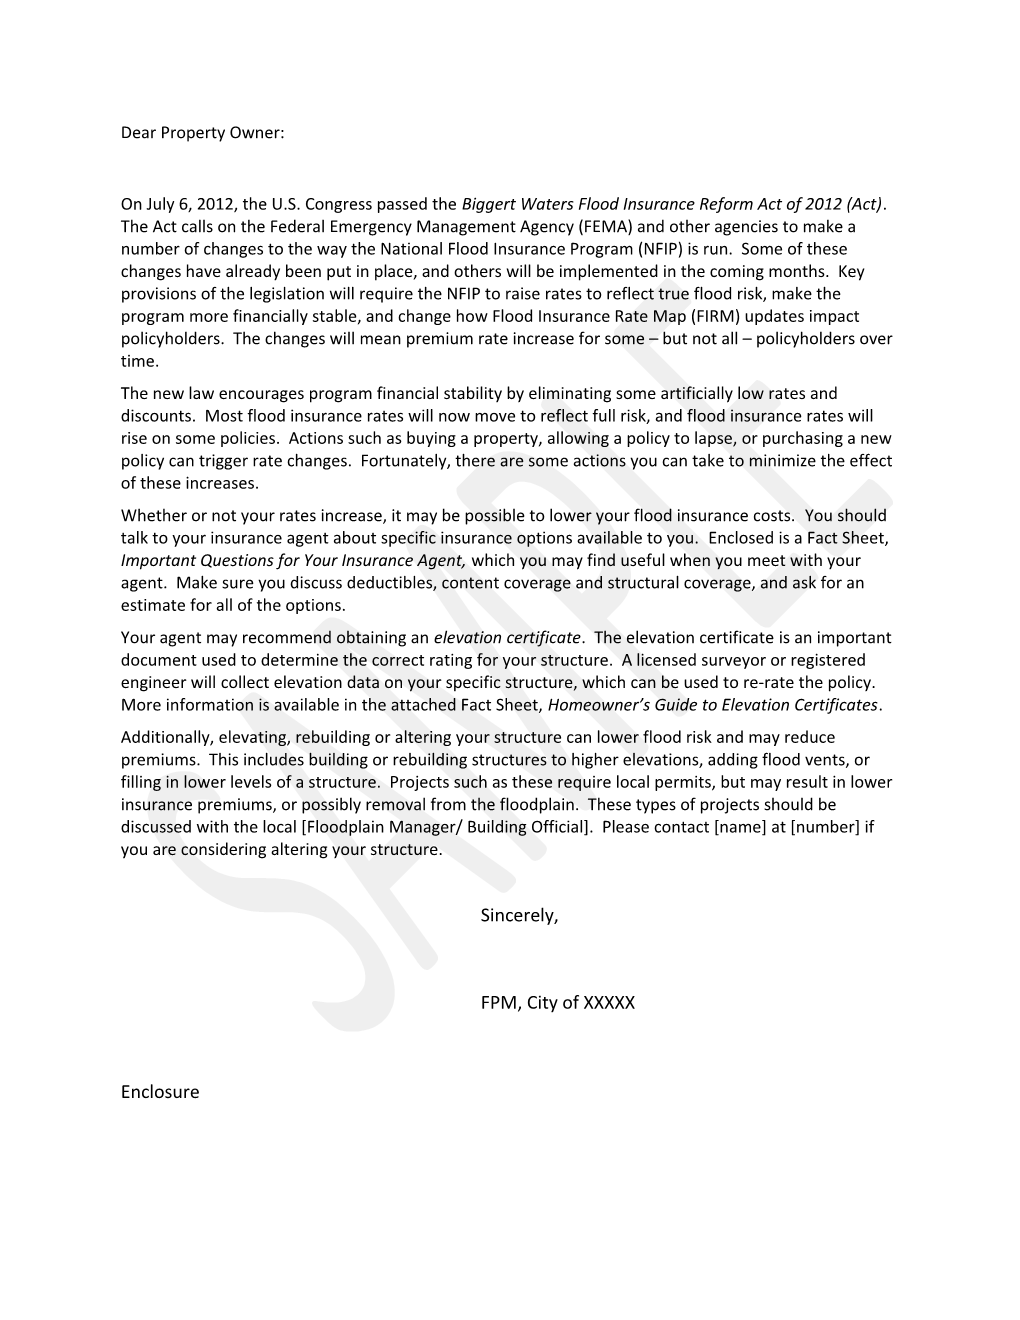 Biggert Waters Letter from Communities to Constituents - Sample